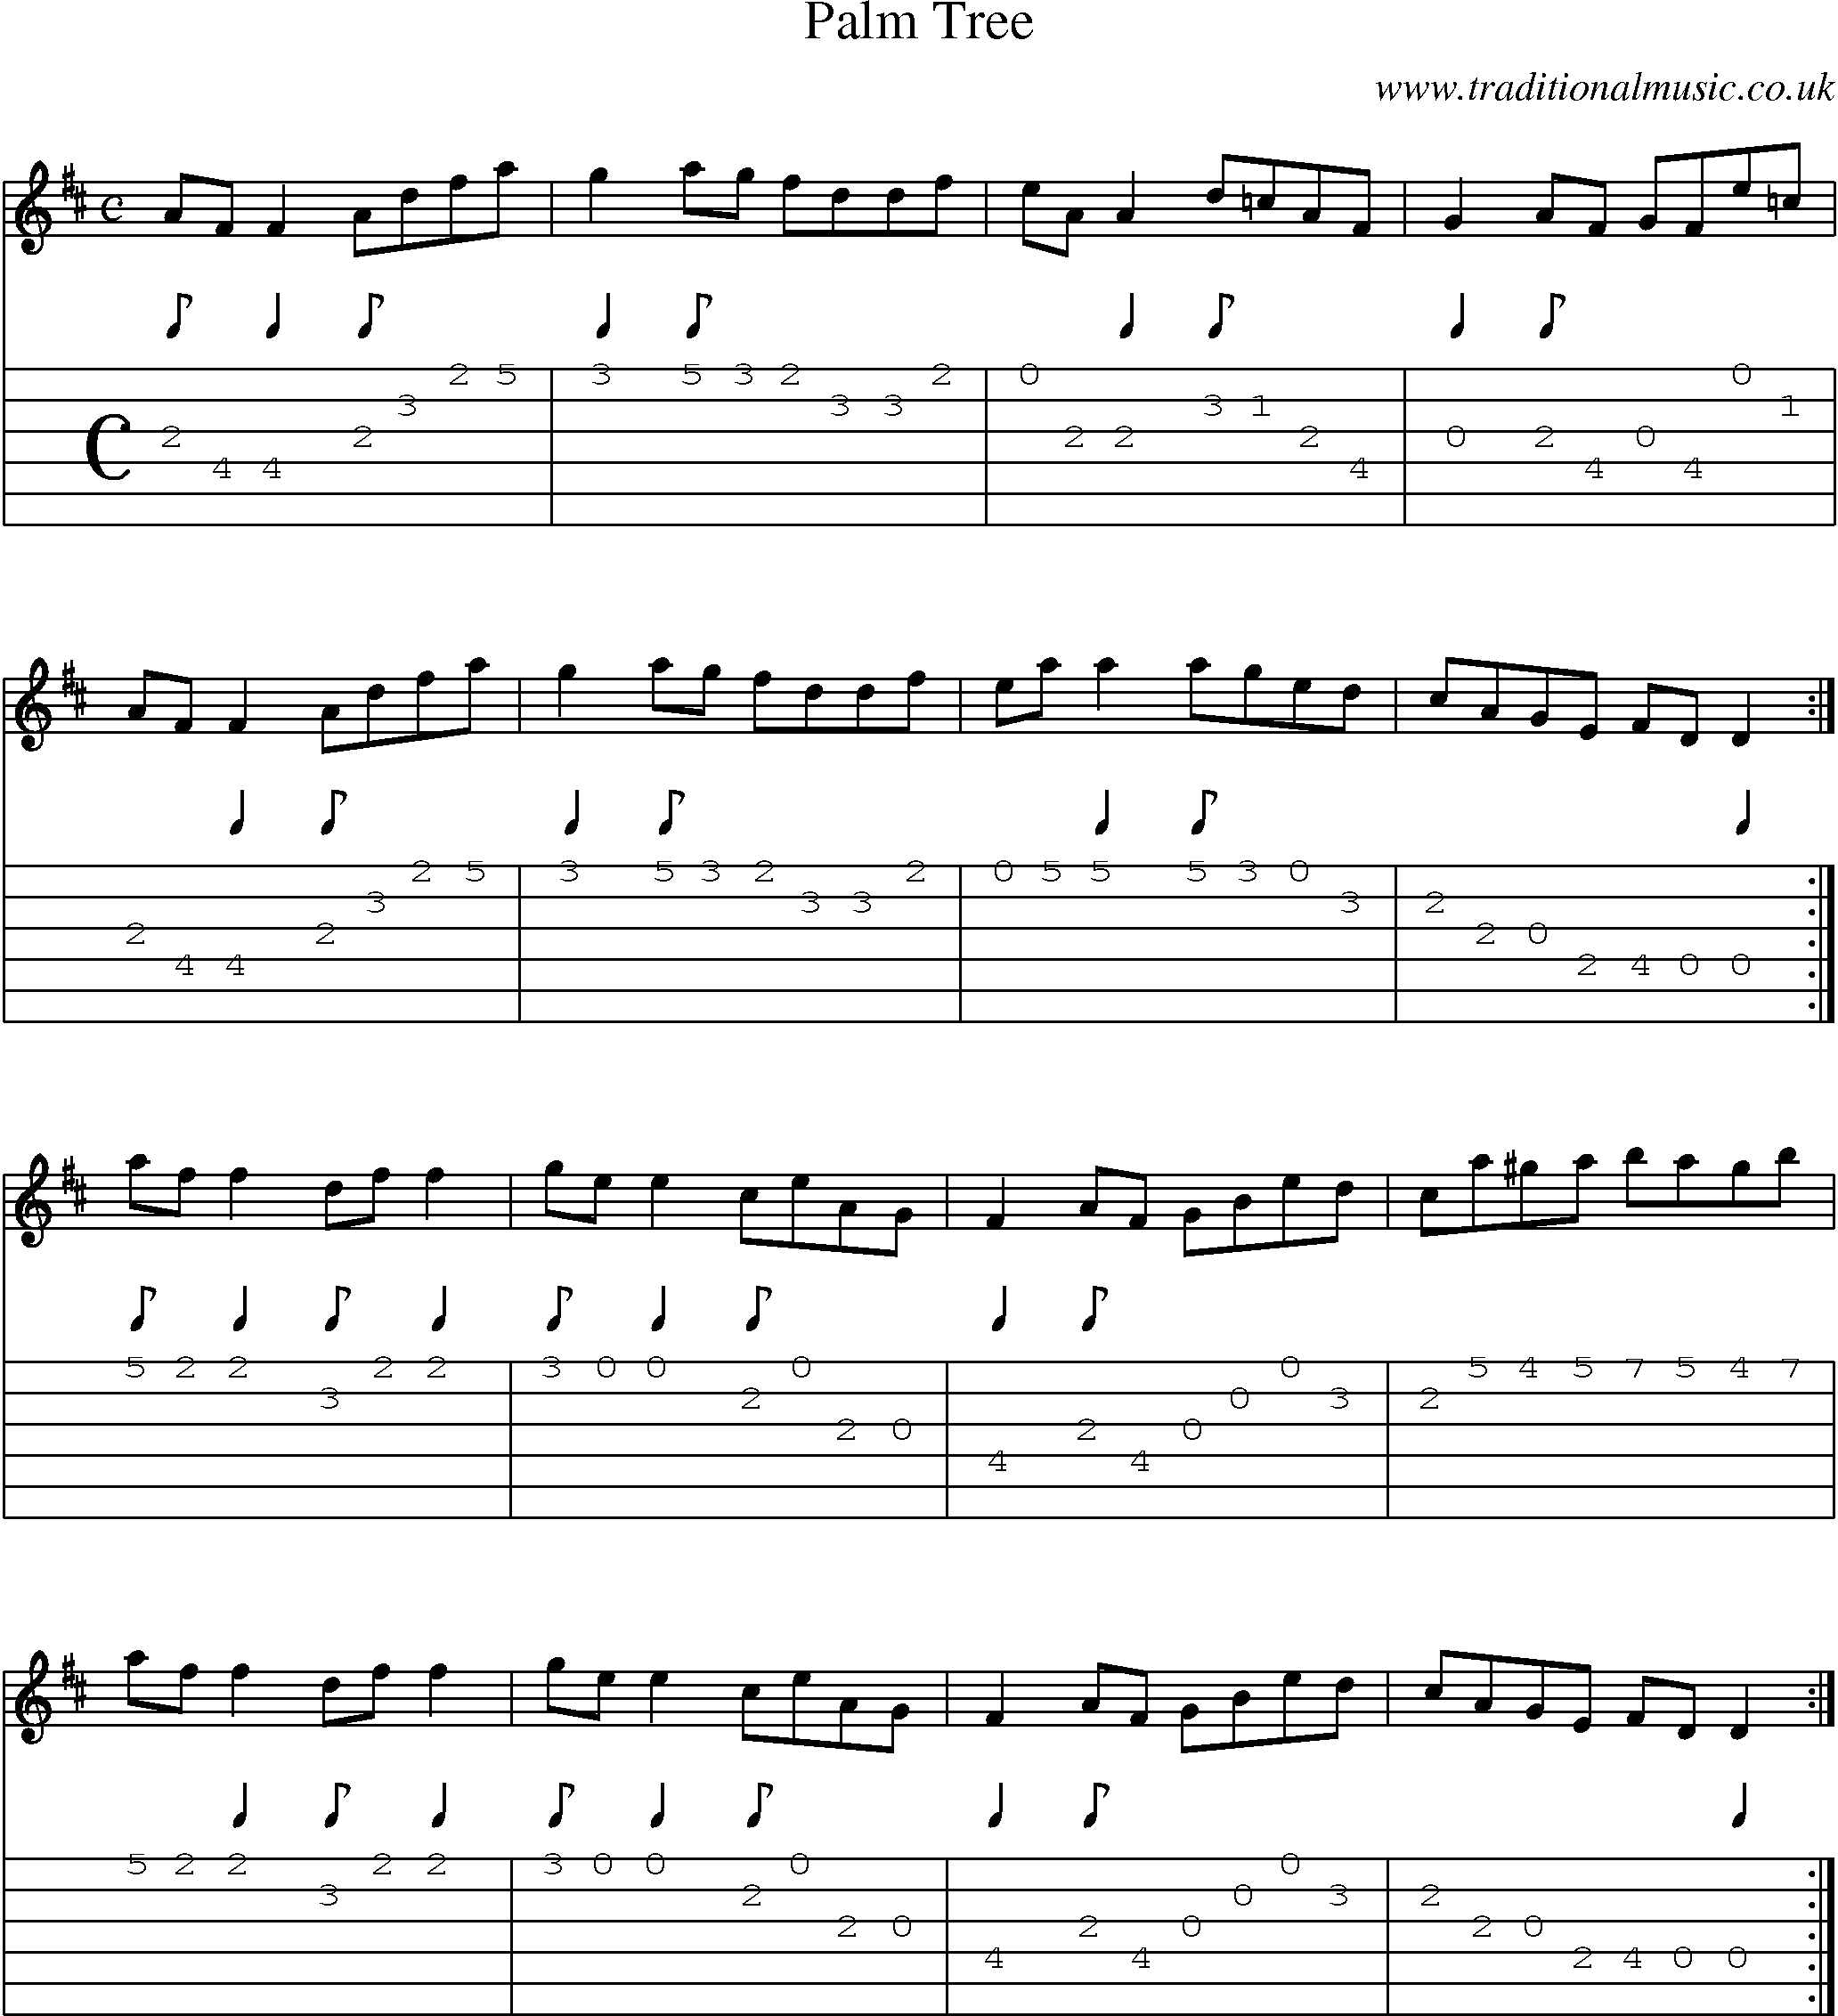 Music Score and Guitar Tabs for Palm Tree